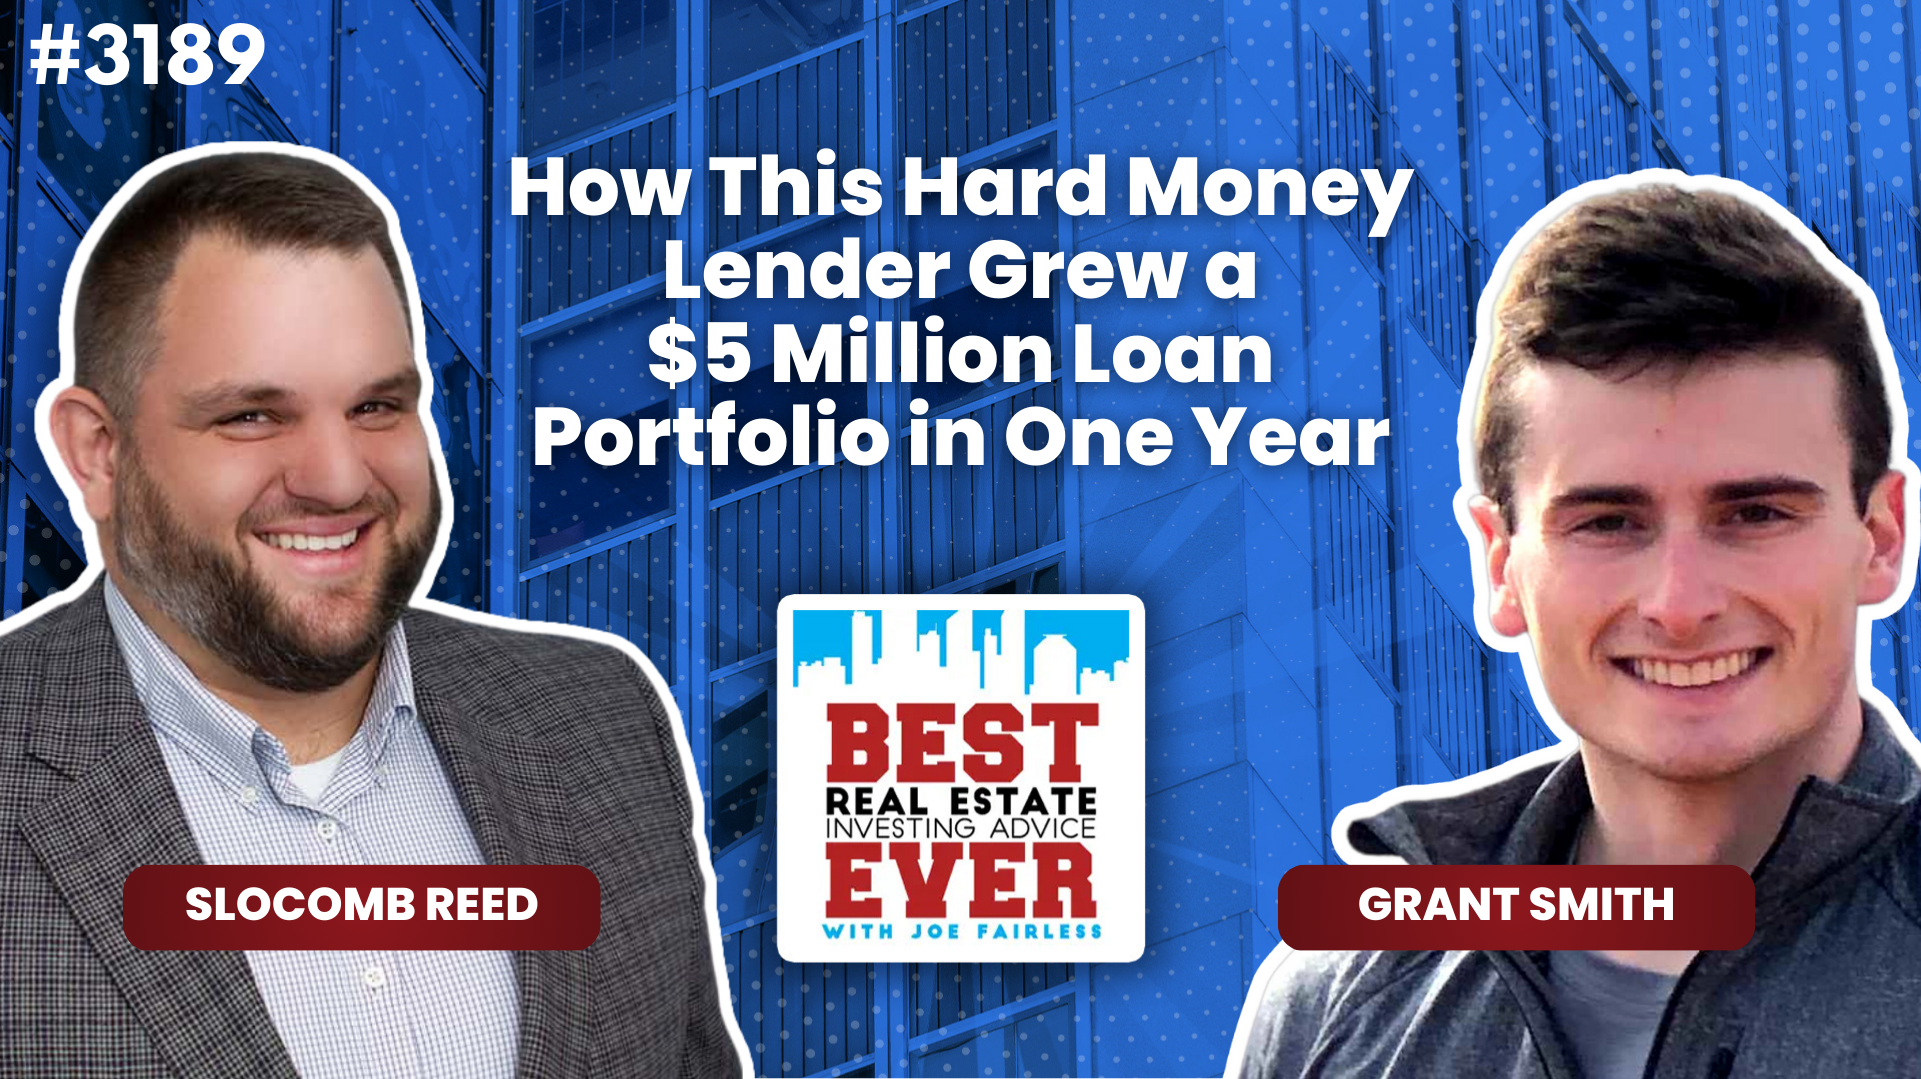 JF3189: How This Hard Money Lender Grew a $5 Million Loan Portfolio in One Year ft. Grant Smith